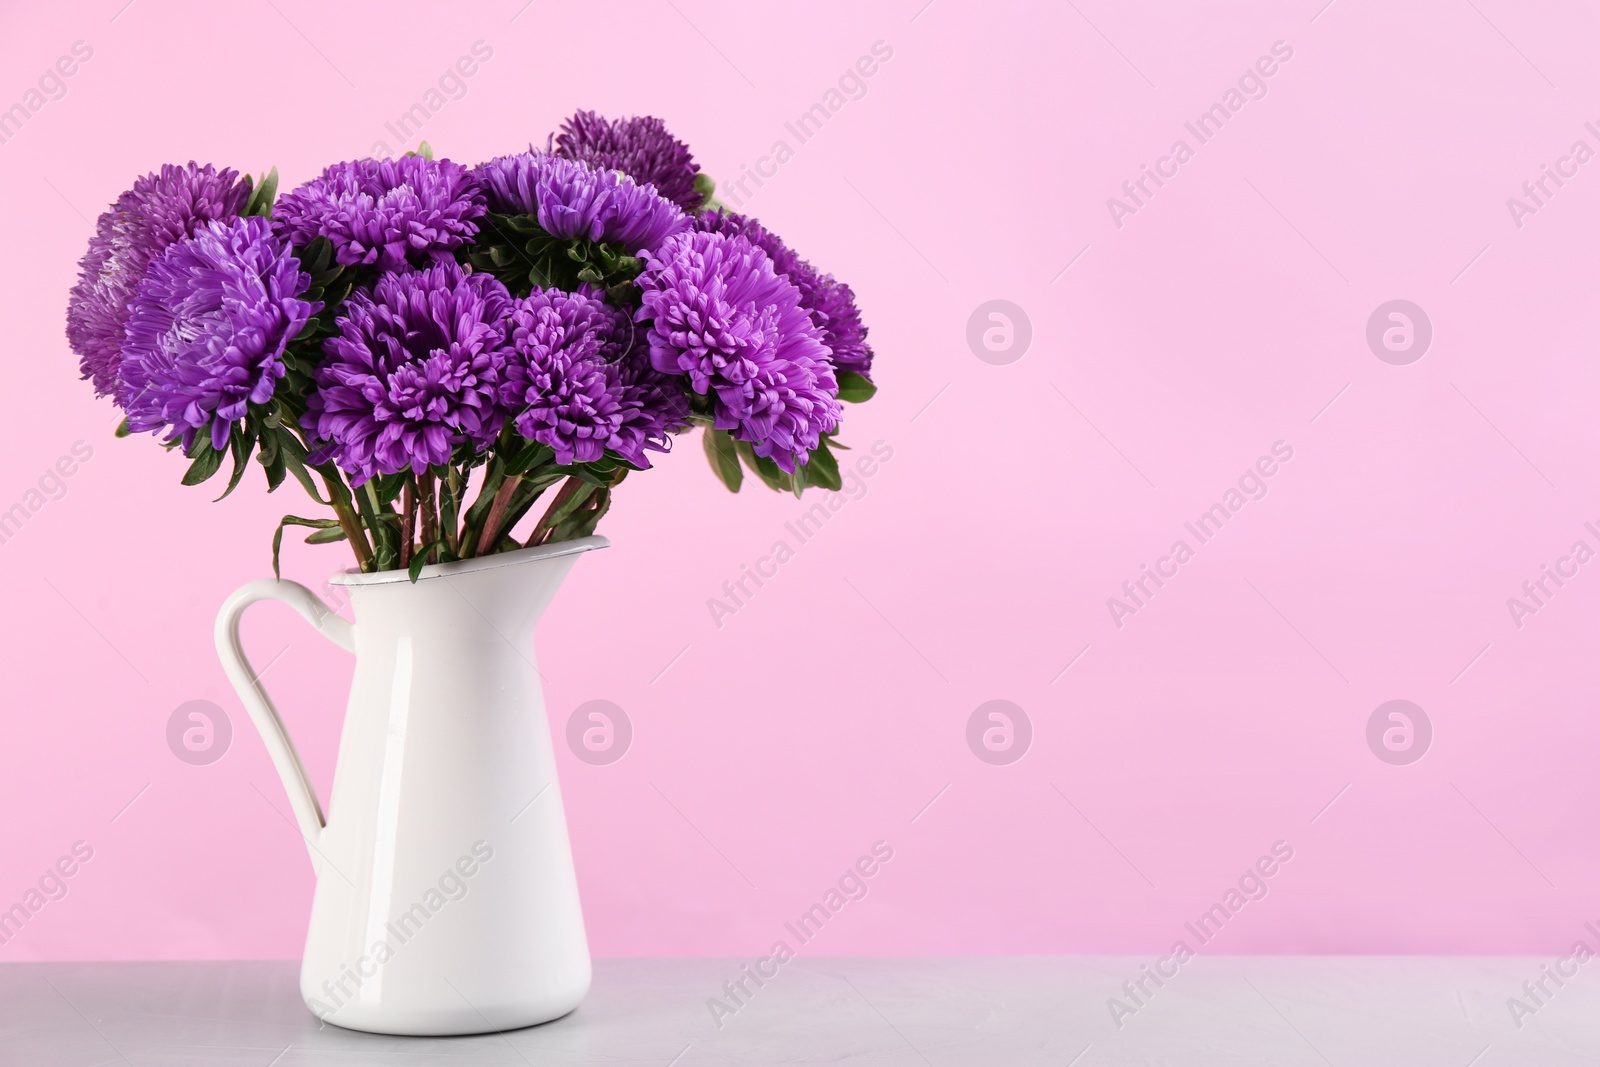 Photo of Beautiful asters in jug on table against pink background, space for text. Autumn flowers